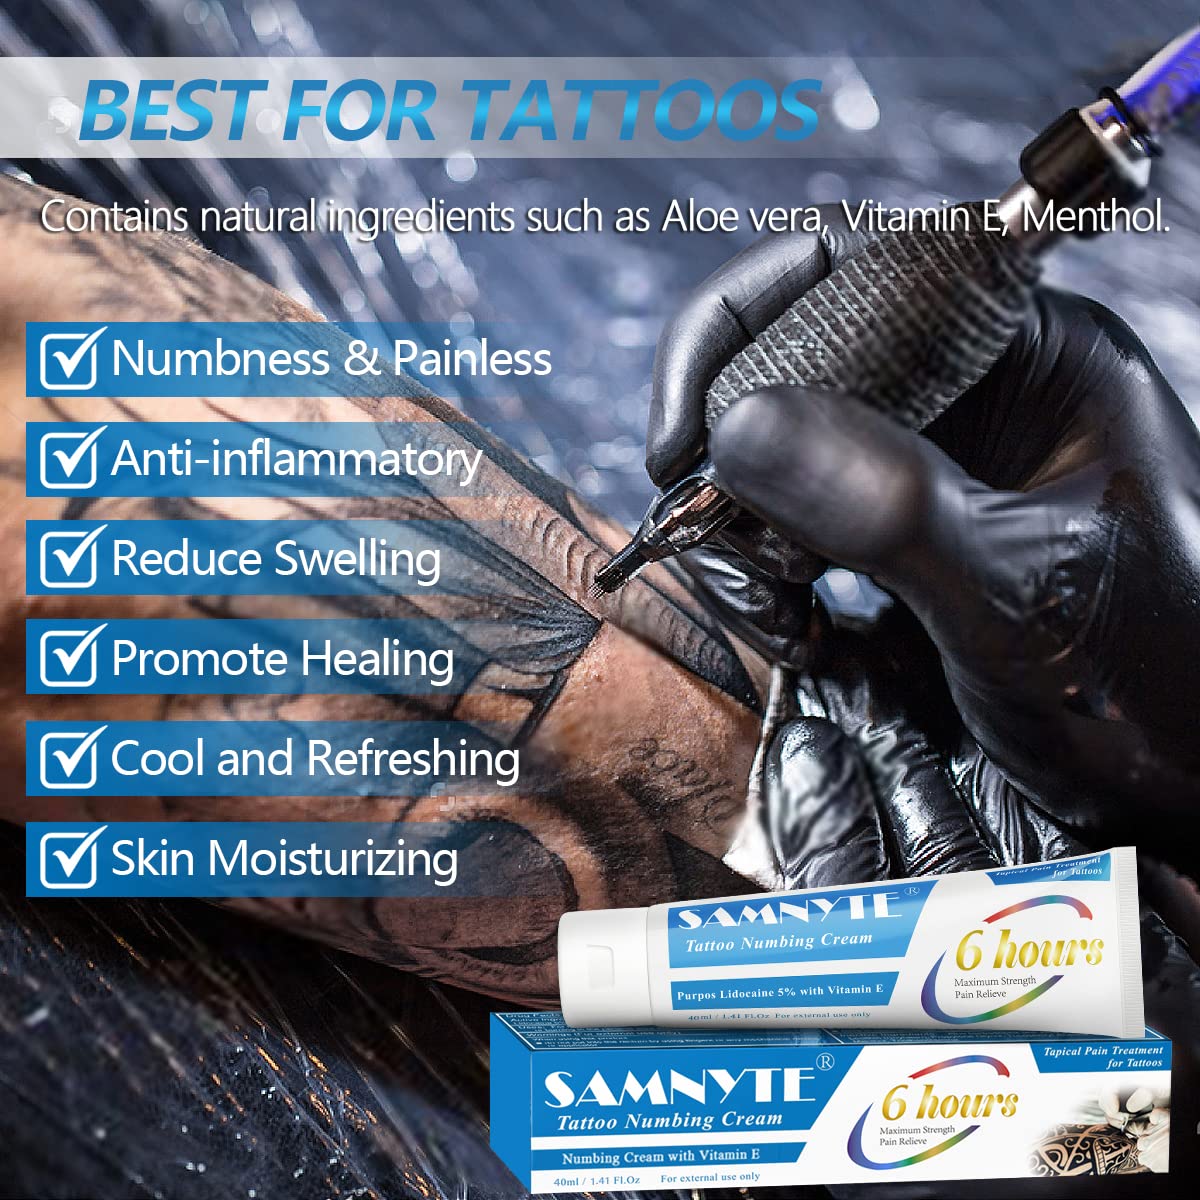 Tattoo Numbing Cream 40g Numbing Cream for Tattooing to Relieve Tattoo  Pain Tattoo Numbing Cream Strong Used for Pain Free Tattoos  All  Cosmetic Piercings Waxing Lip filler  by Samnyte by